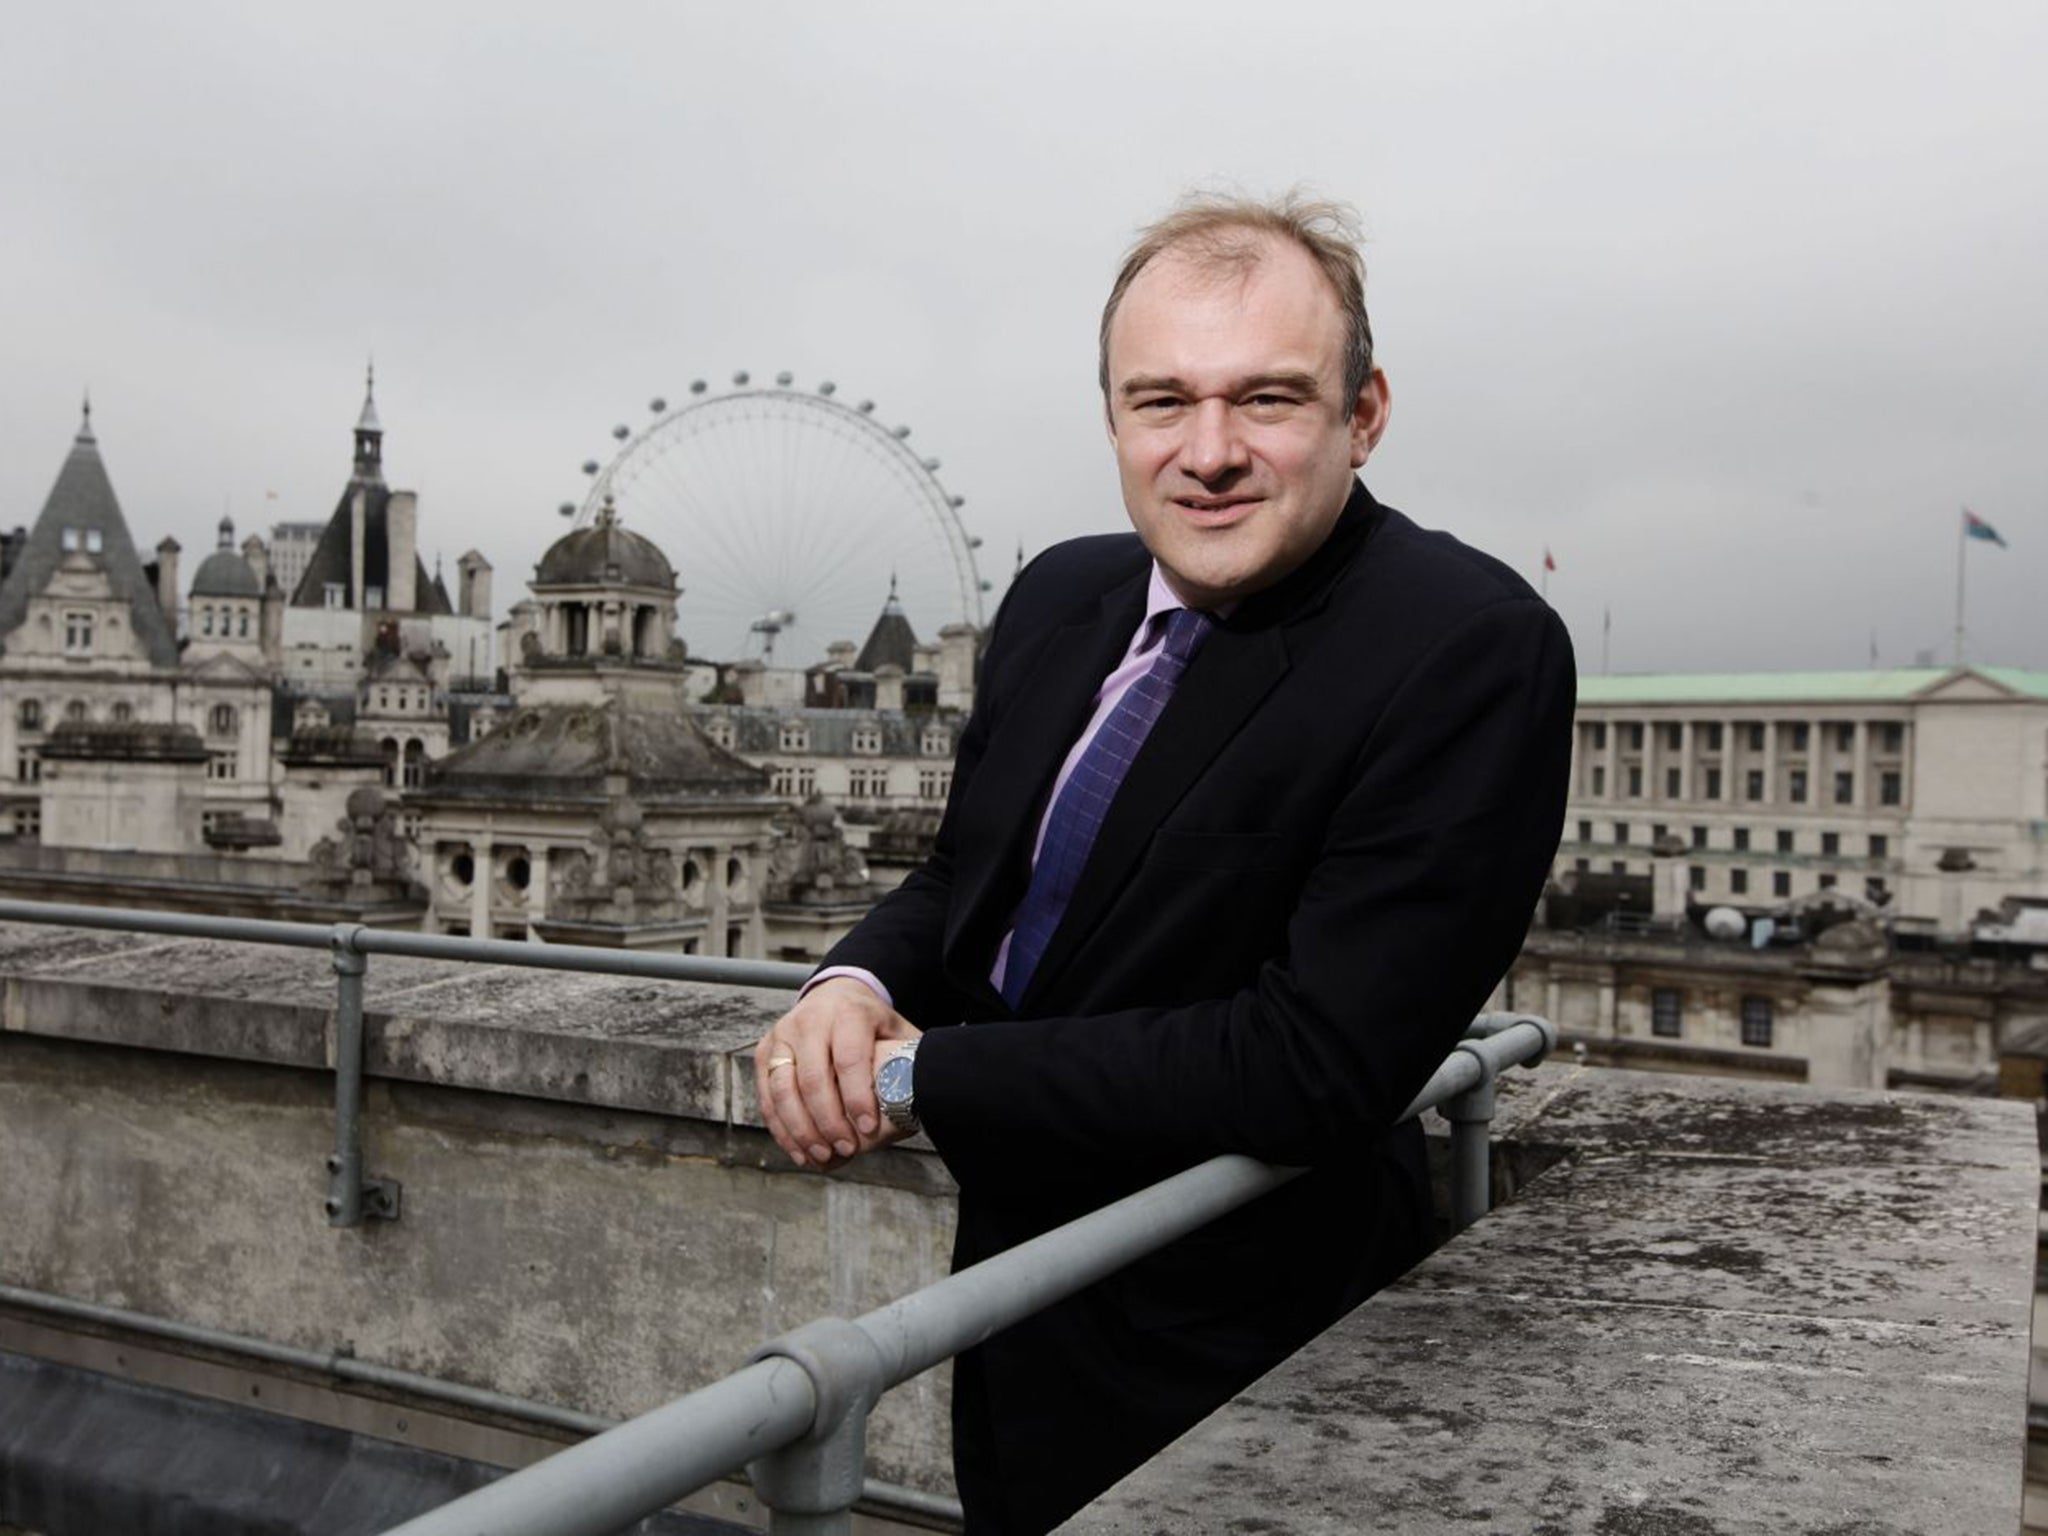 Ed Davey is seen as ‘clever, a reliable liberal and extremely good with people’ (Justin Sutcliffe)